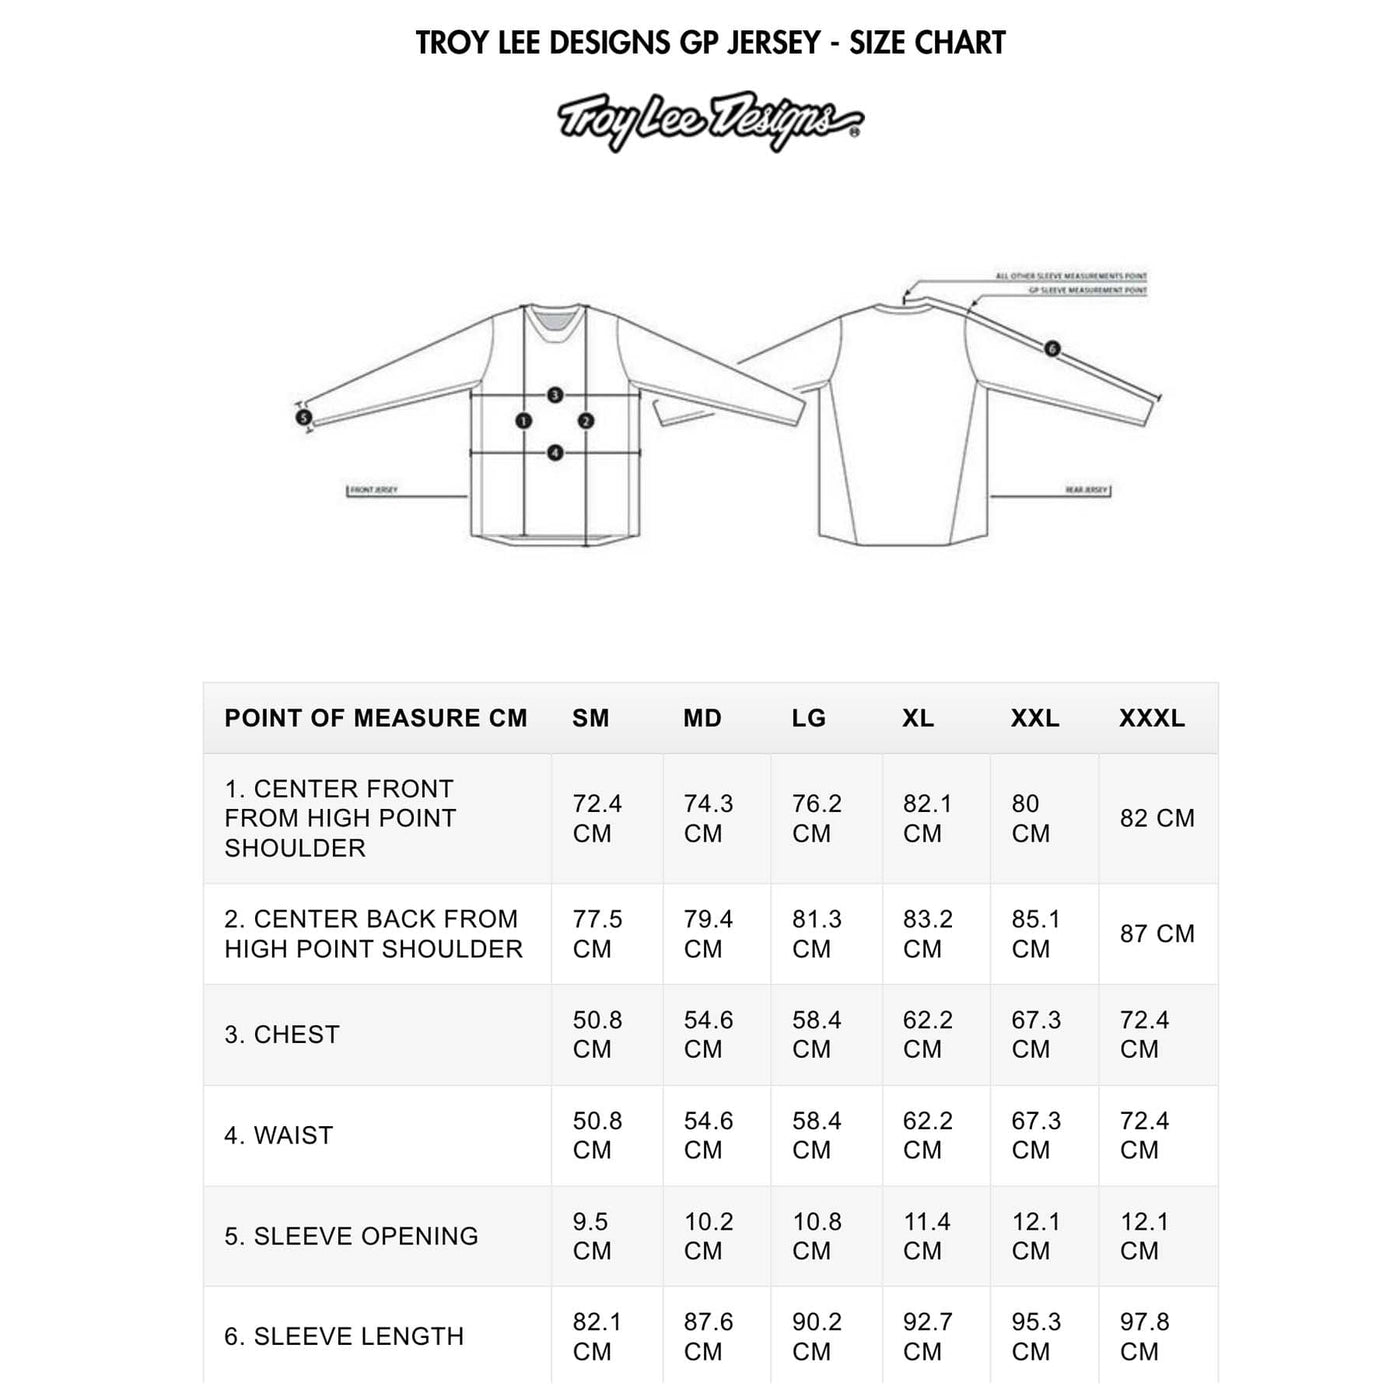 TROY LEE DESIGNS GP JERSEY - SIZE CHART | 8Lines.eu - Only The Best Style!